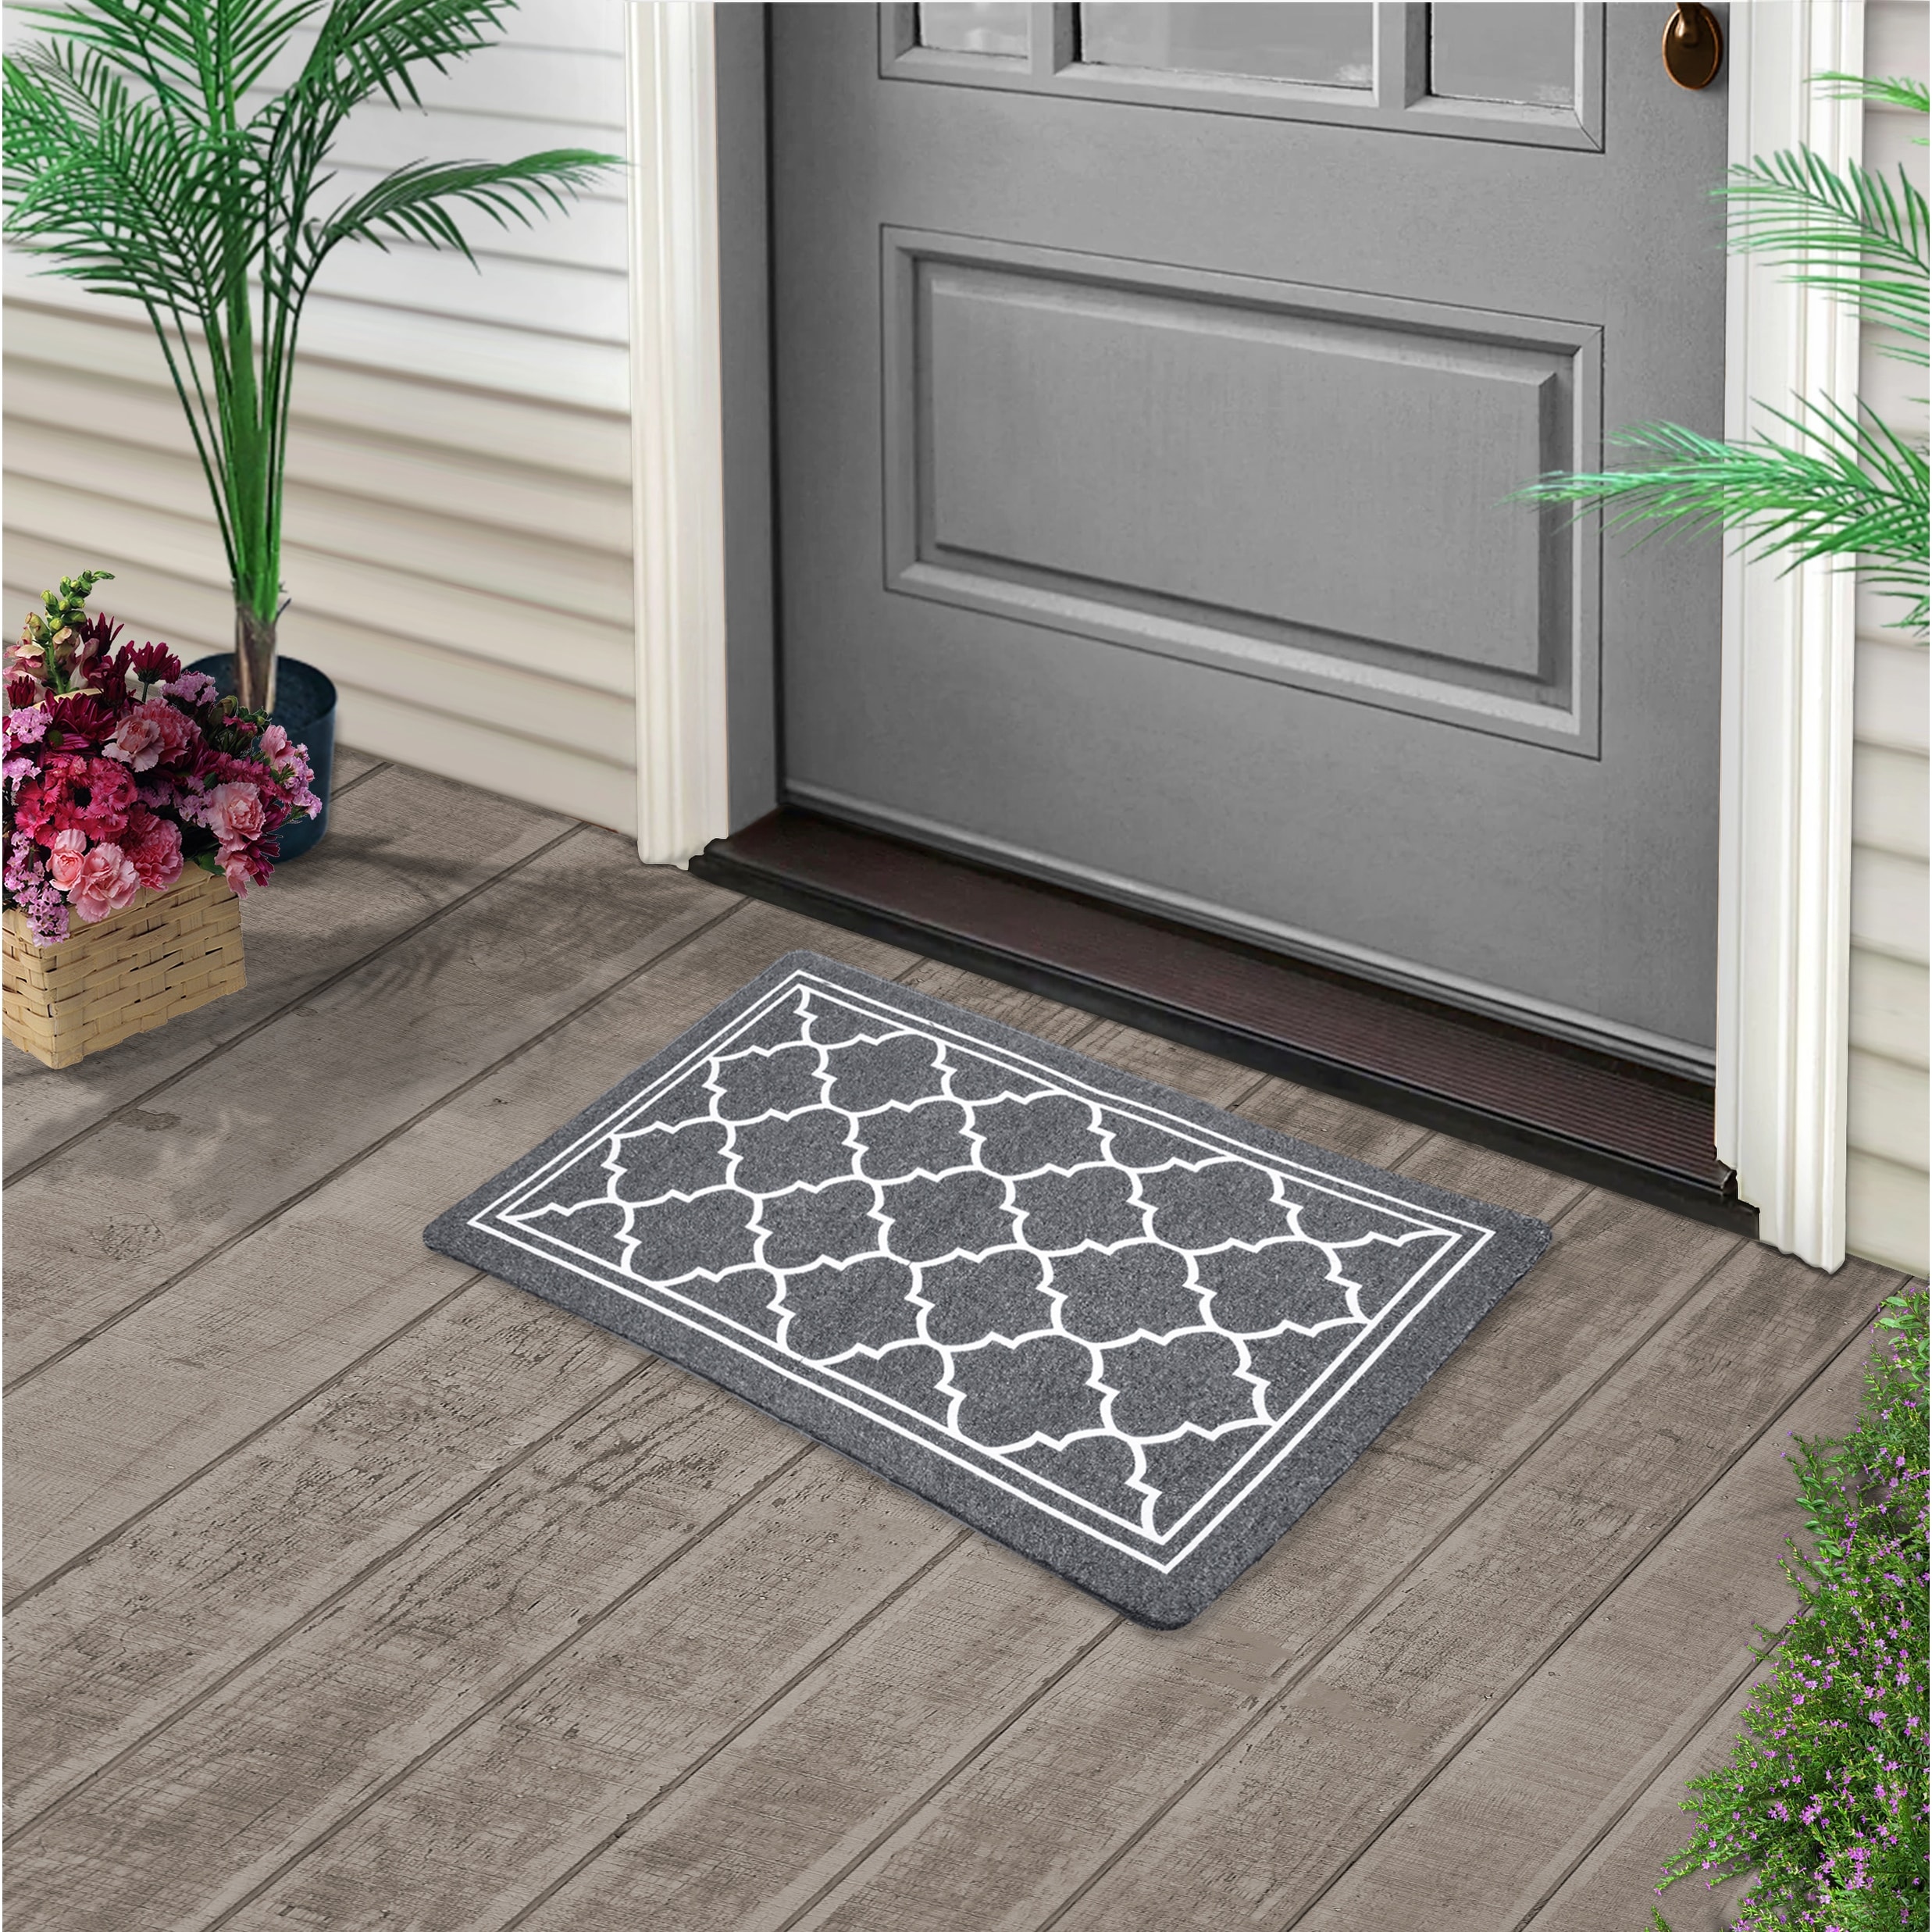 https://ak1.ostkcdn.com/images/products/is/images/direct/a4c17513216284cc199973a9fd416ff480329eba/Mascot-Hardware-Door-Mat-Rubber-Backing-Non-Slip-Door-Mats-30inx18in-Absorbent-Resist-Dirt-Entryway-Washable.jpg